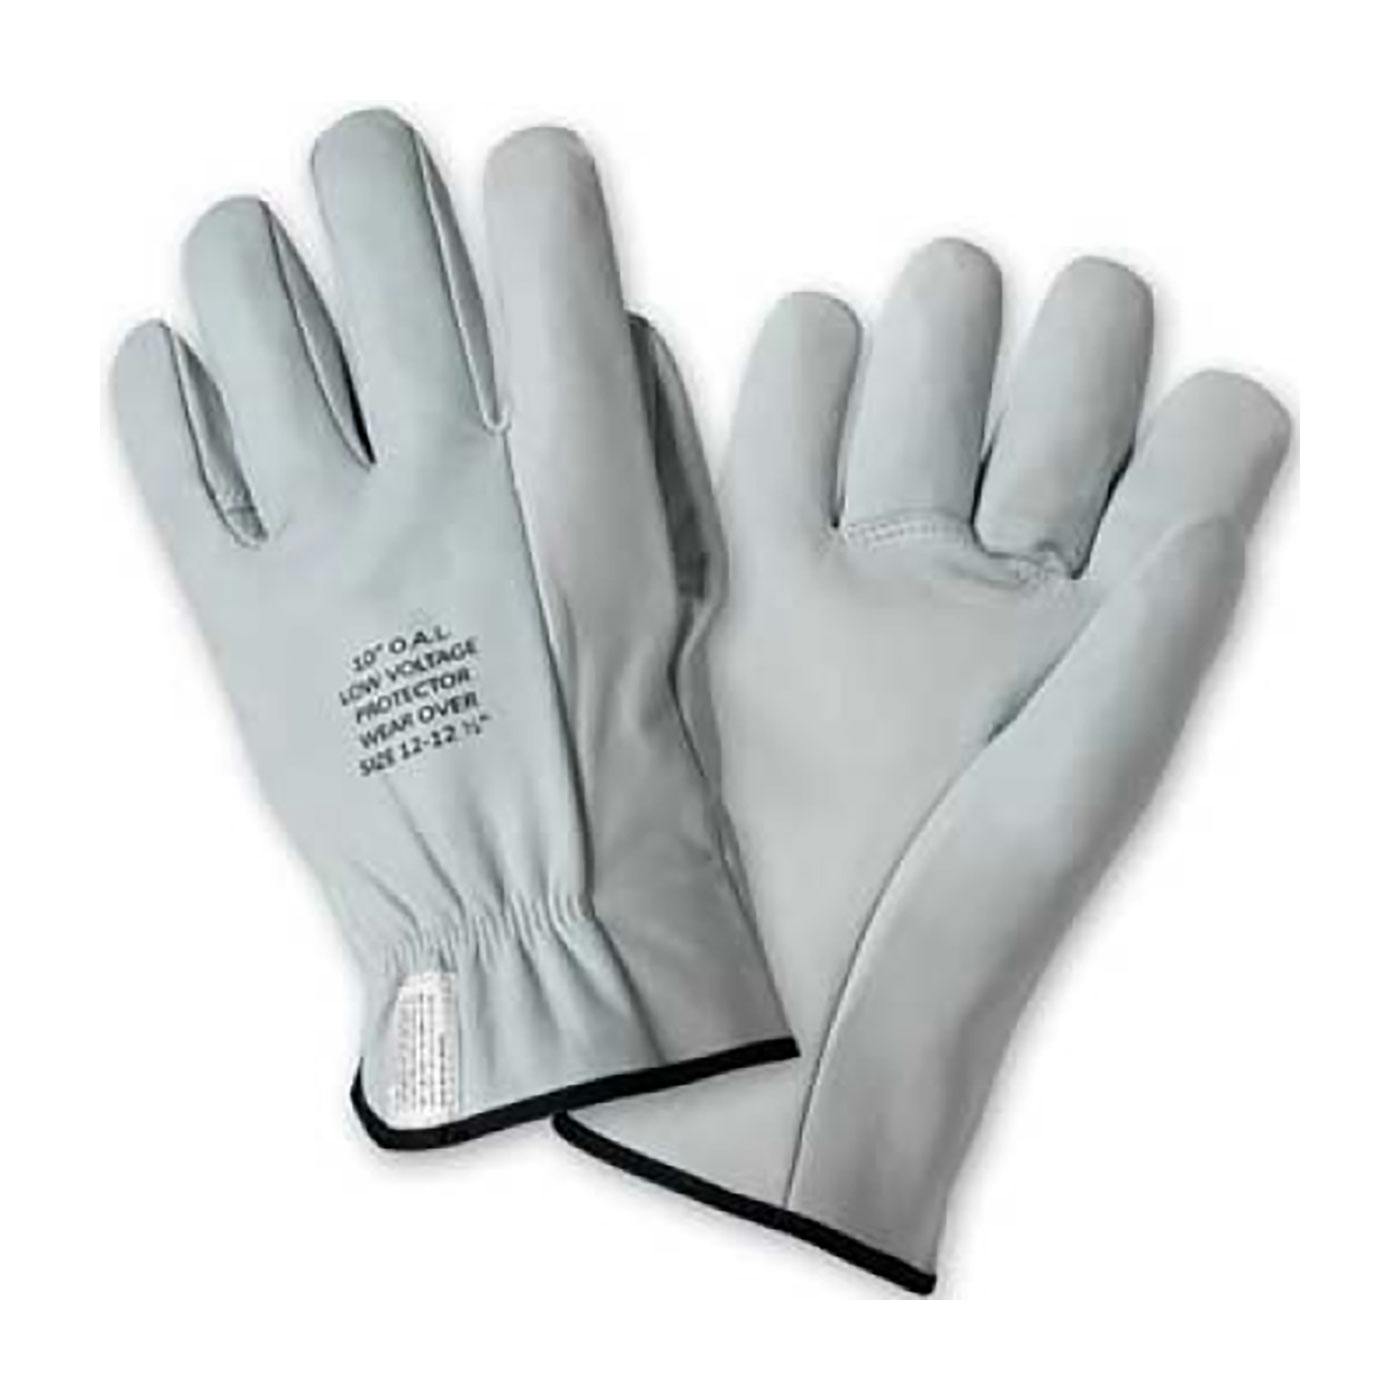 PIP® Top Grain Goatskin Leather Protector for Rubber Insulating Gloves - Driver's Style (LM991)